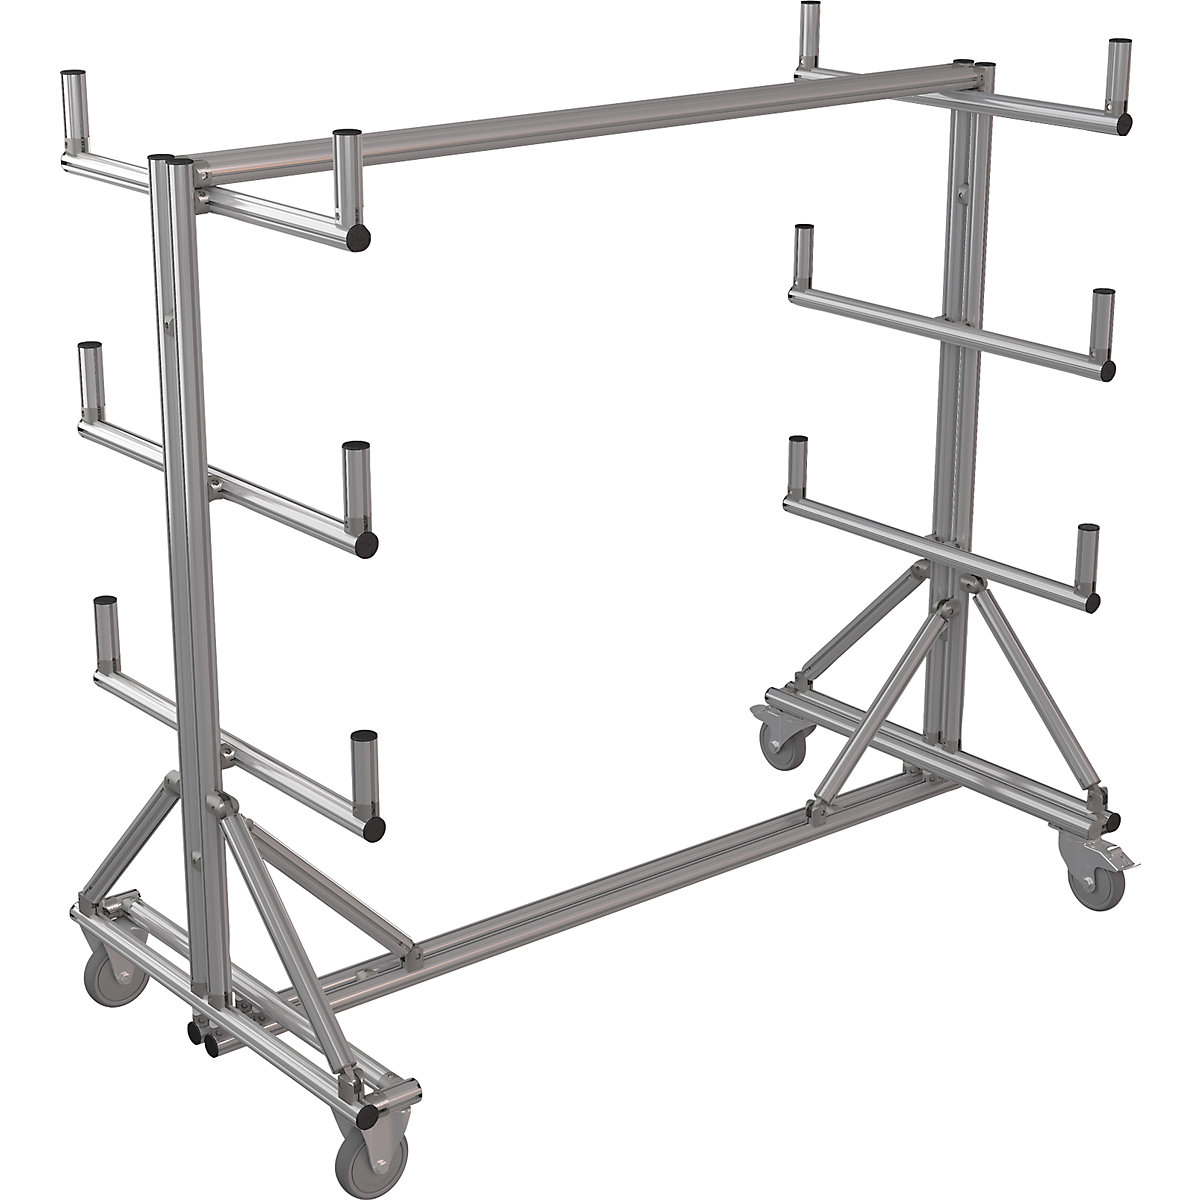 SUPPORT cantilever trolley made of aluminium profile